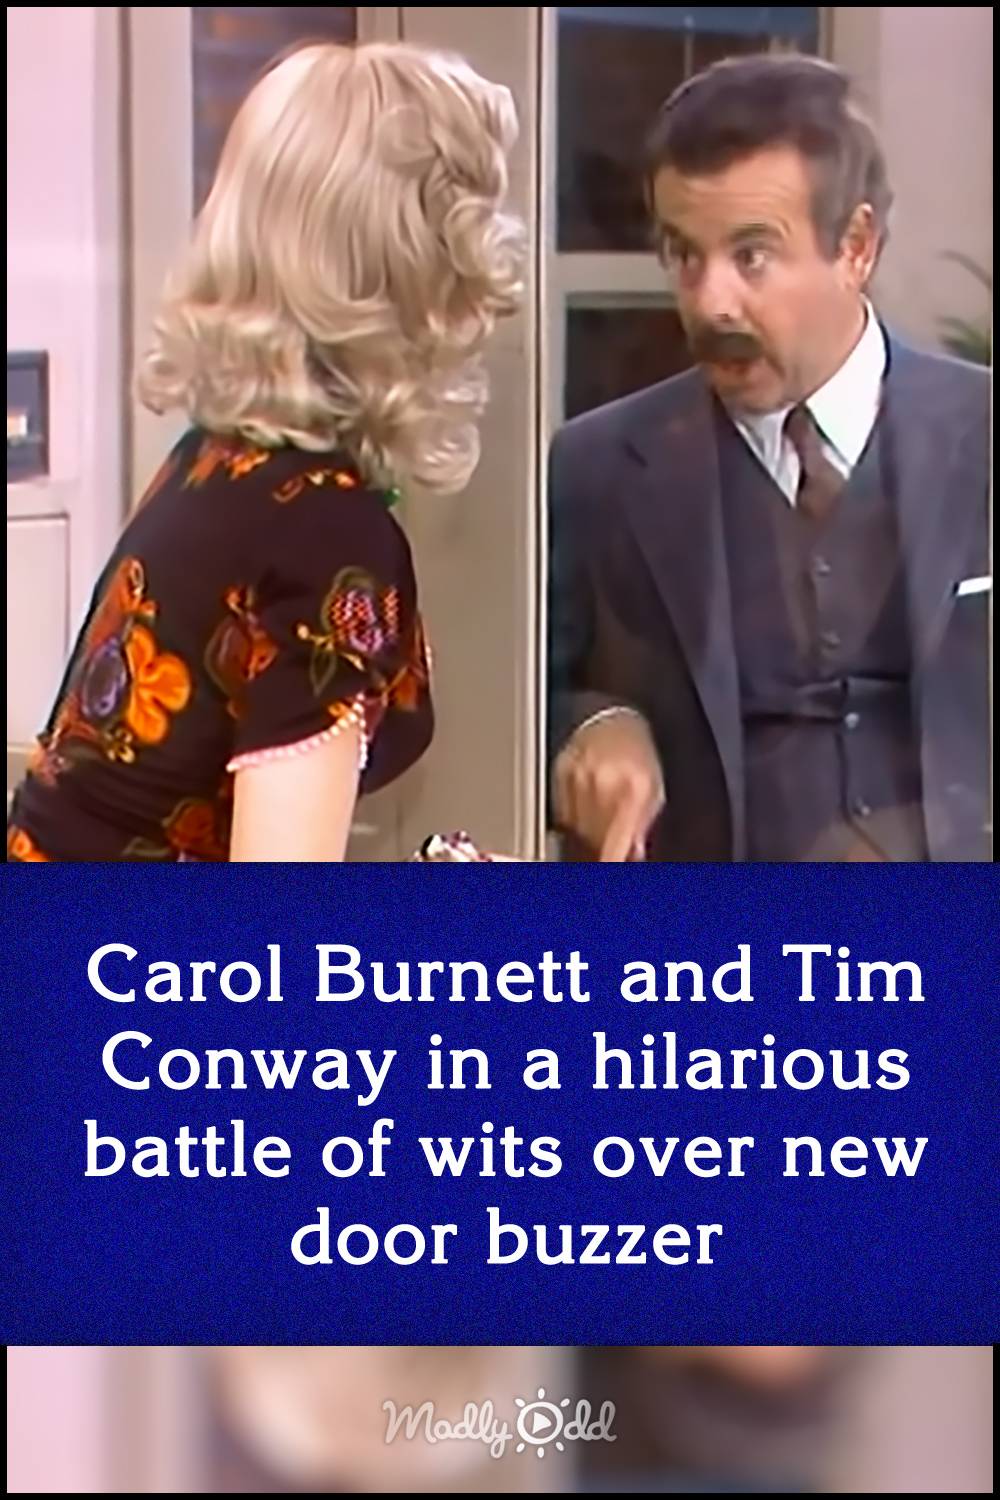 Carol Burnett and Tim Conway in a hilarious battle of wits over new door buzzer